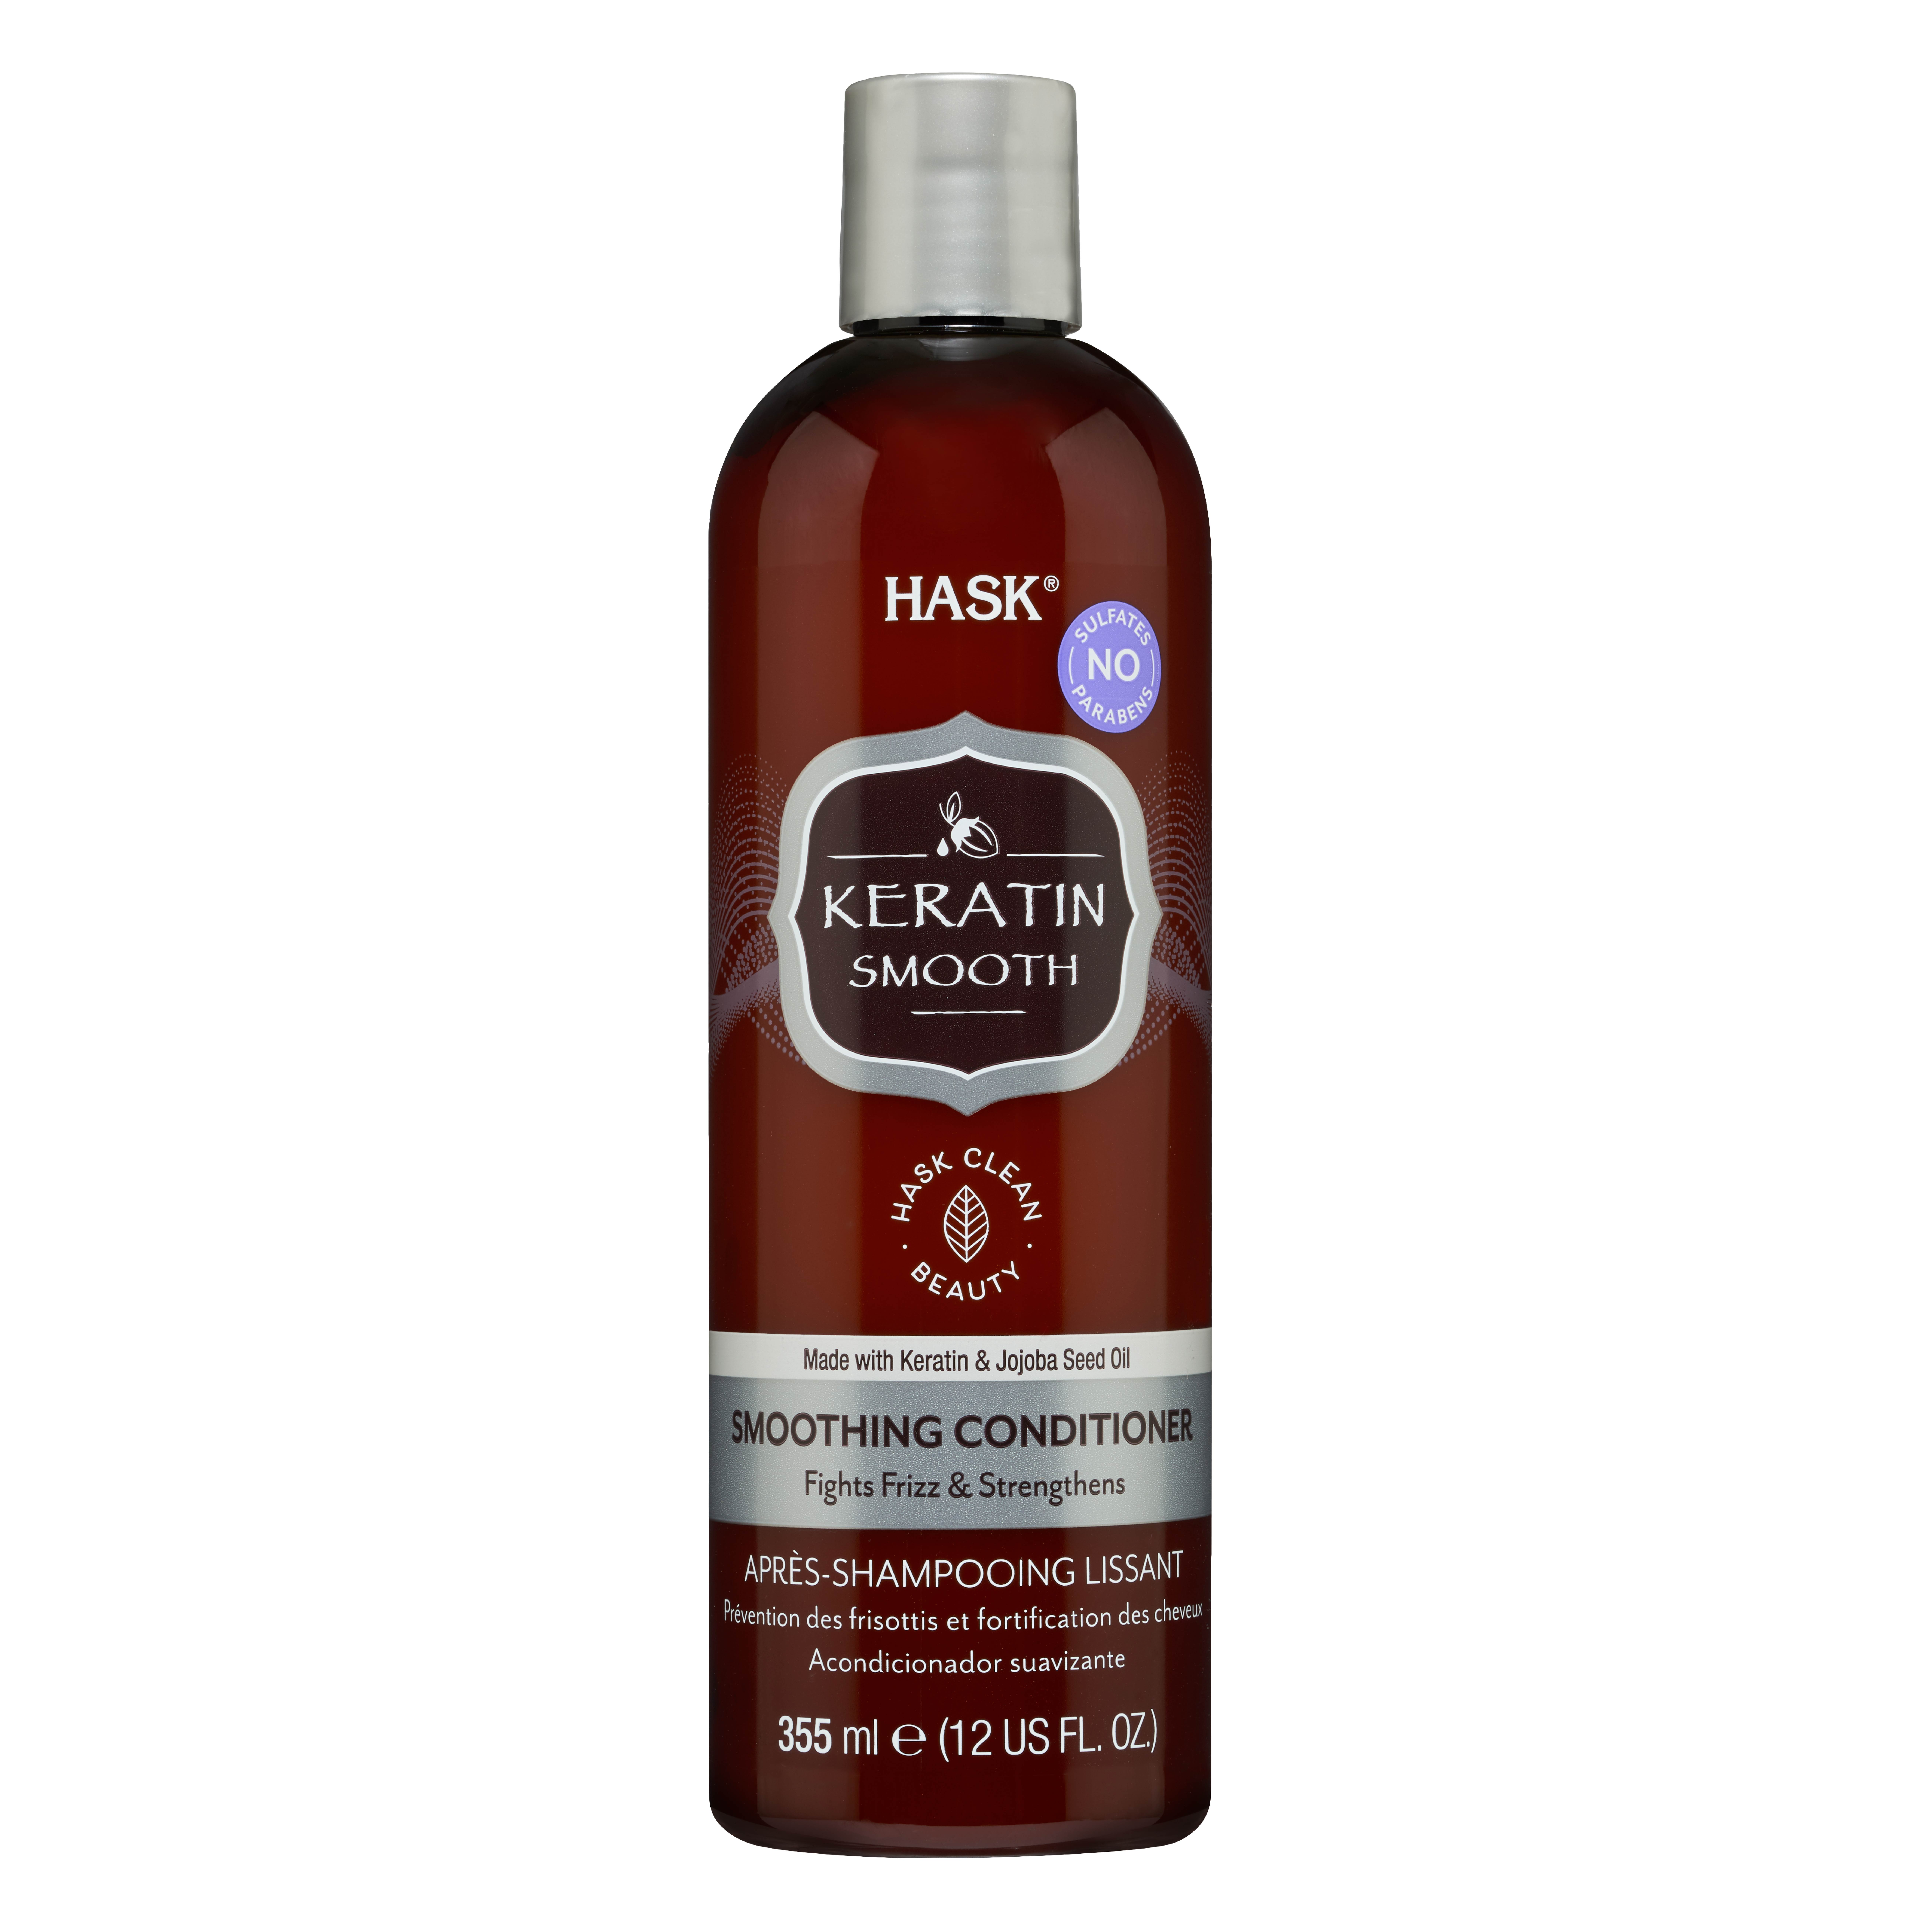 Hask Keratin Protein Frizz Control Shine Enhancing Smoothing Daily Conditioner with Fruity Floral Scent, 12 fl oz - image 1 of 14